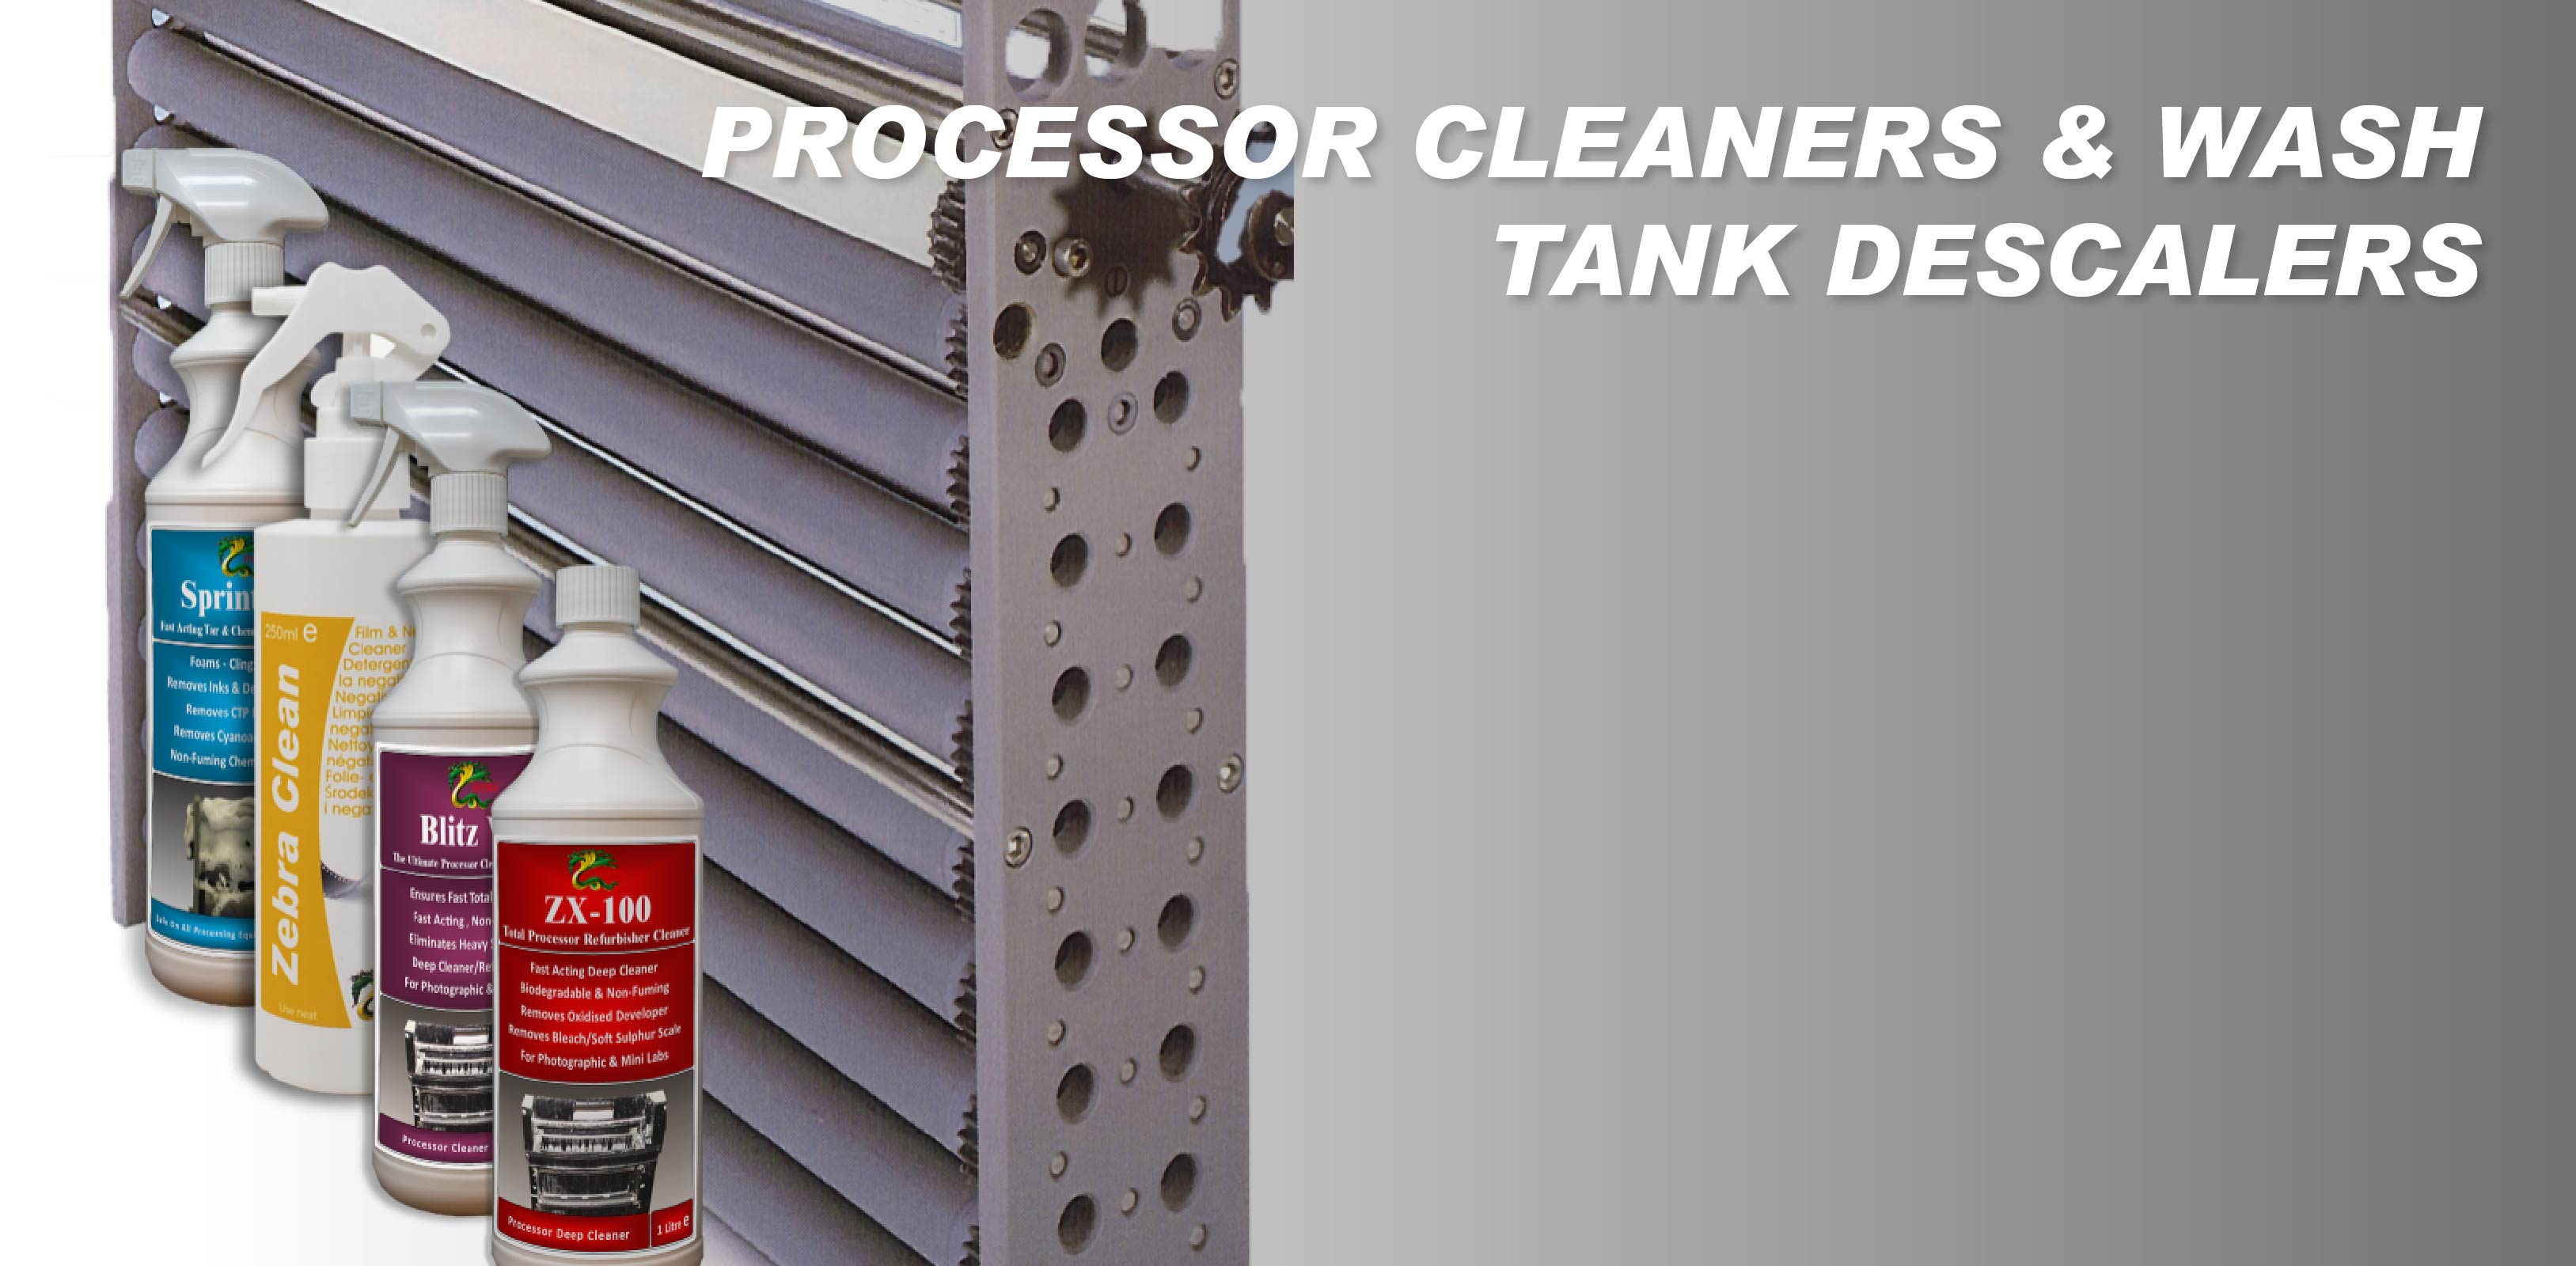 Processor Cleaners/Wash Tank Descalers